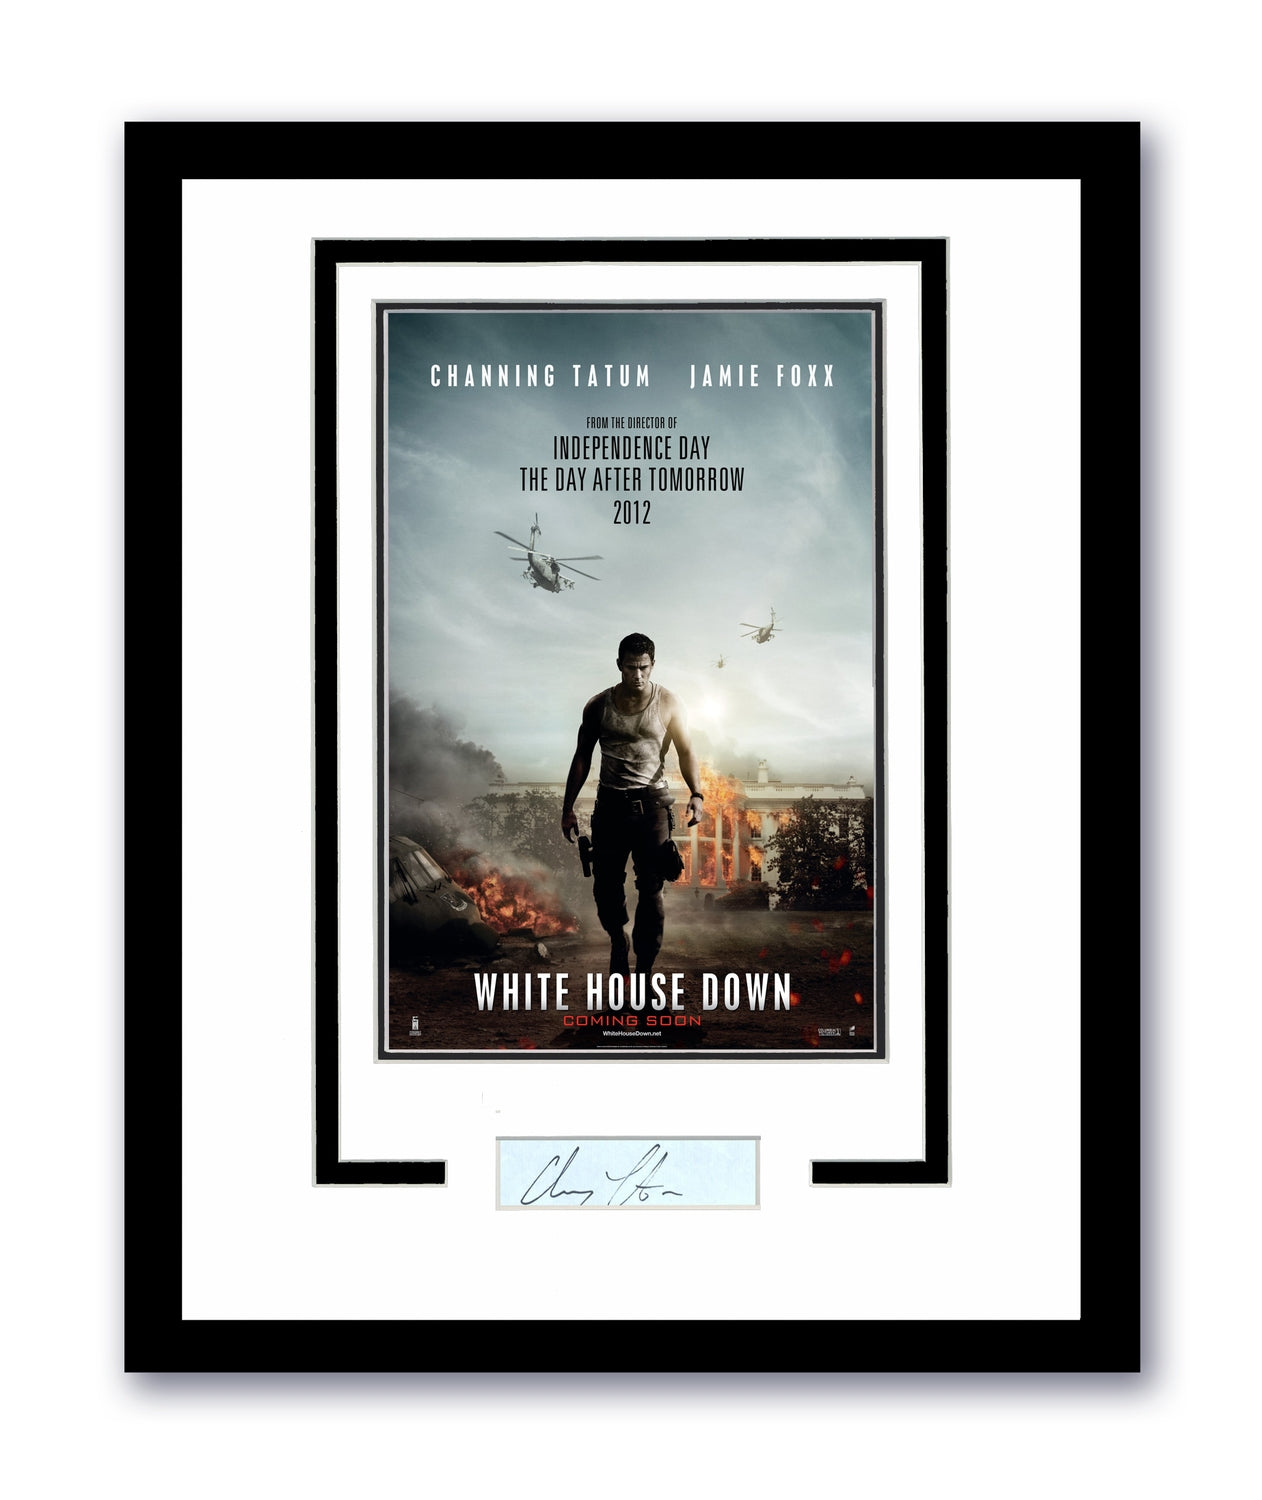 White House Down Channing Tatum Autograph Signed 11x14 Framed Poster Photo ACOA 2